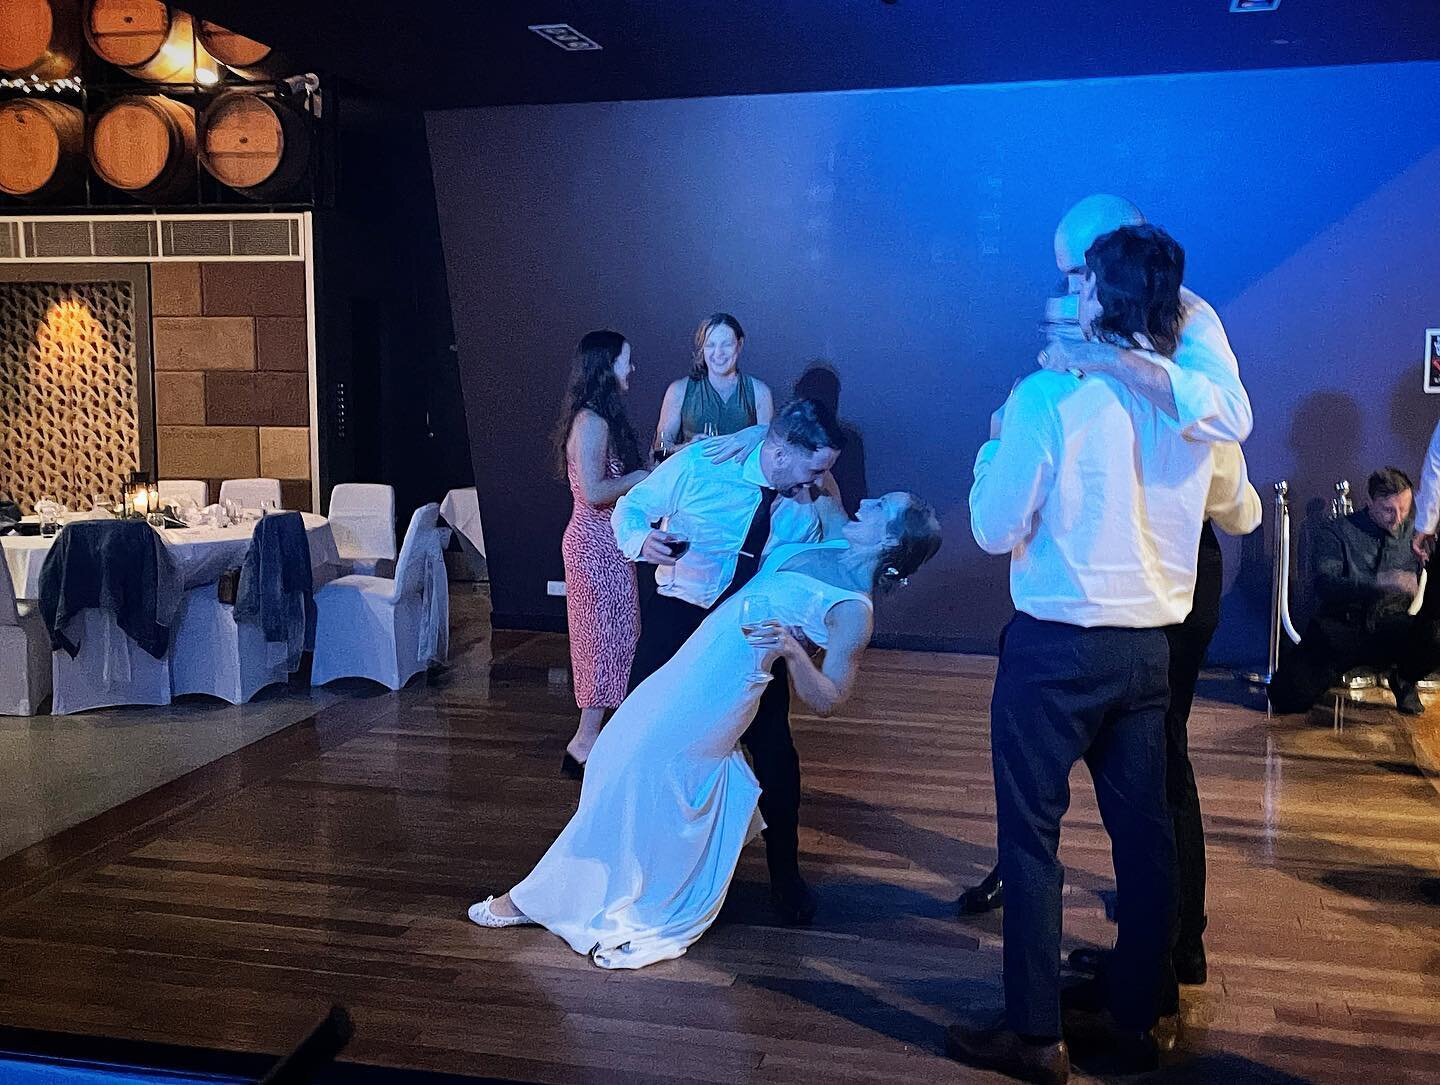 ✨TIFFANY &amp; MITCH✨

How sweet is this little moment! The newlyweds enjoying a slow dance at the end of their beautiful night. 

Congrats to Tiff and Mitch on their wedding back in April. It was a beautiful ceremony at the @natwinecentre gardens, f